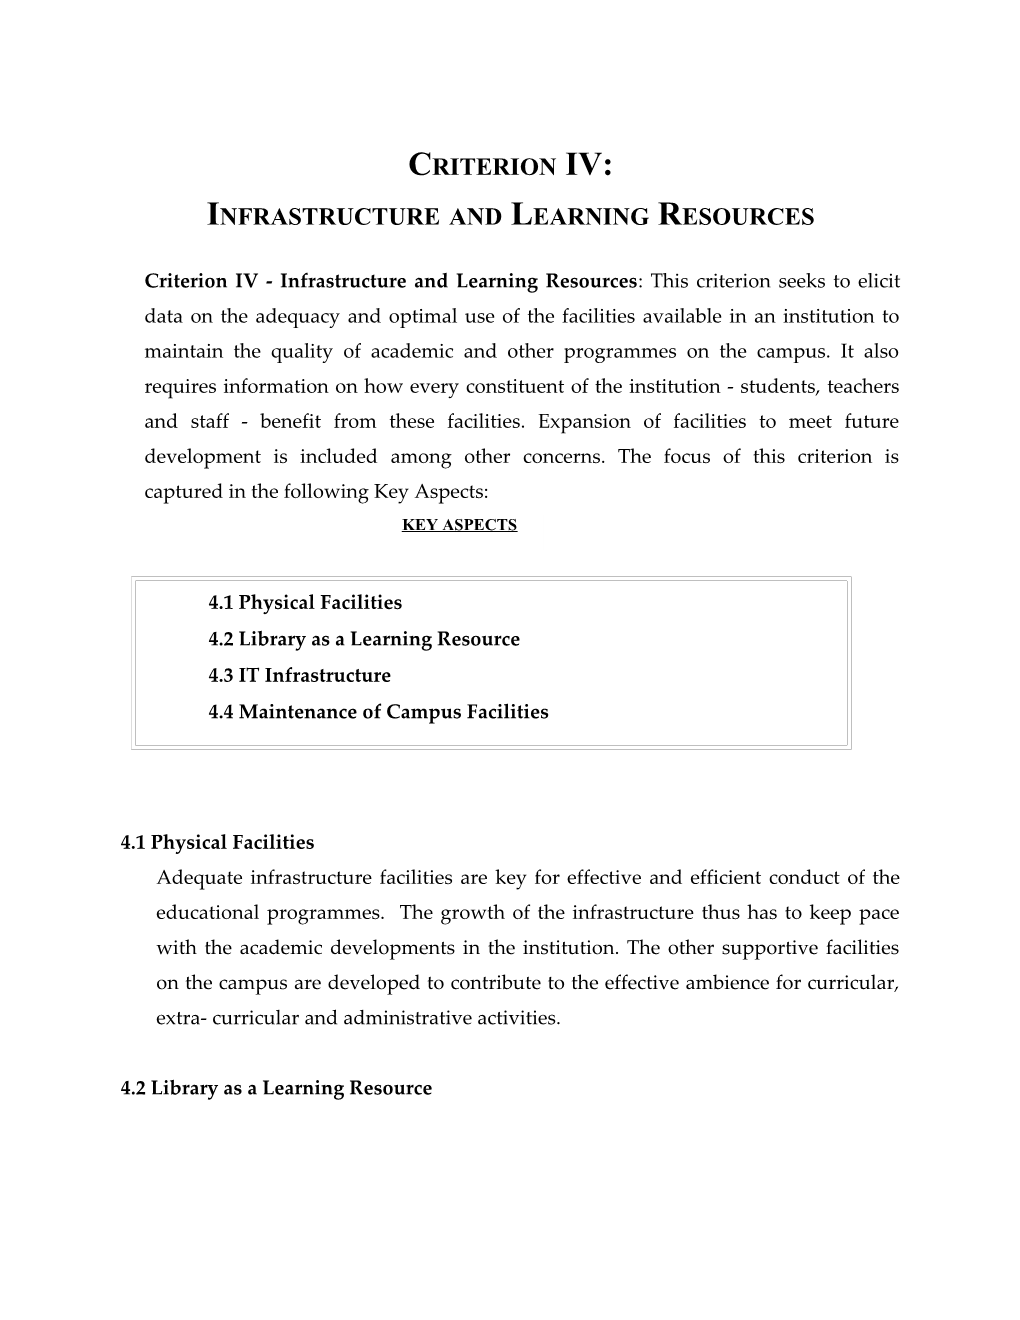 Infrastructure and Learning Resources